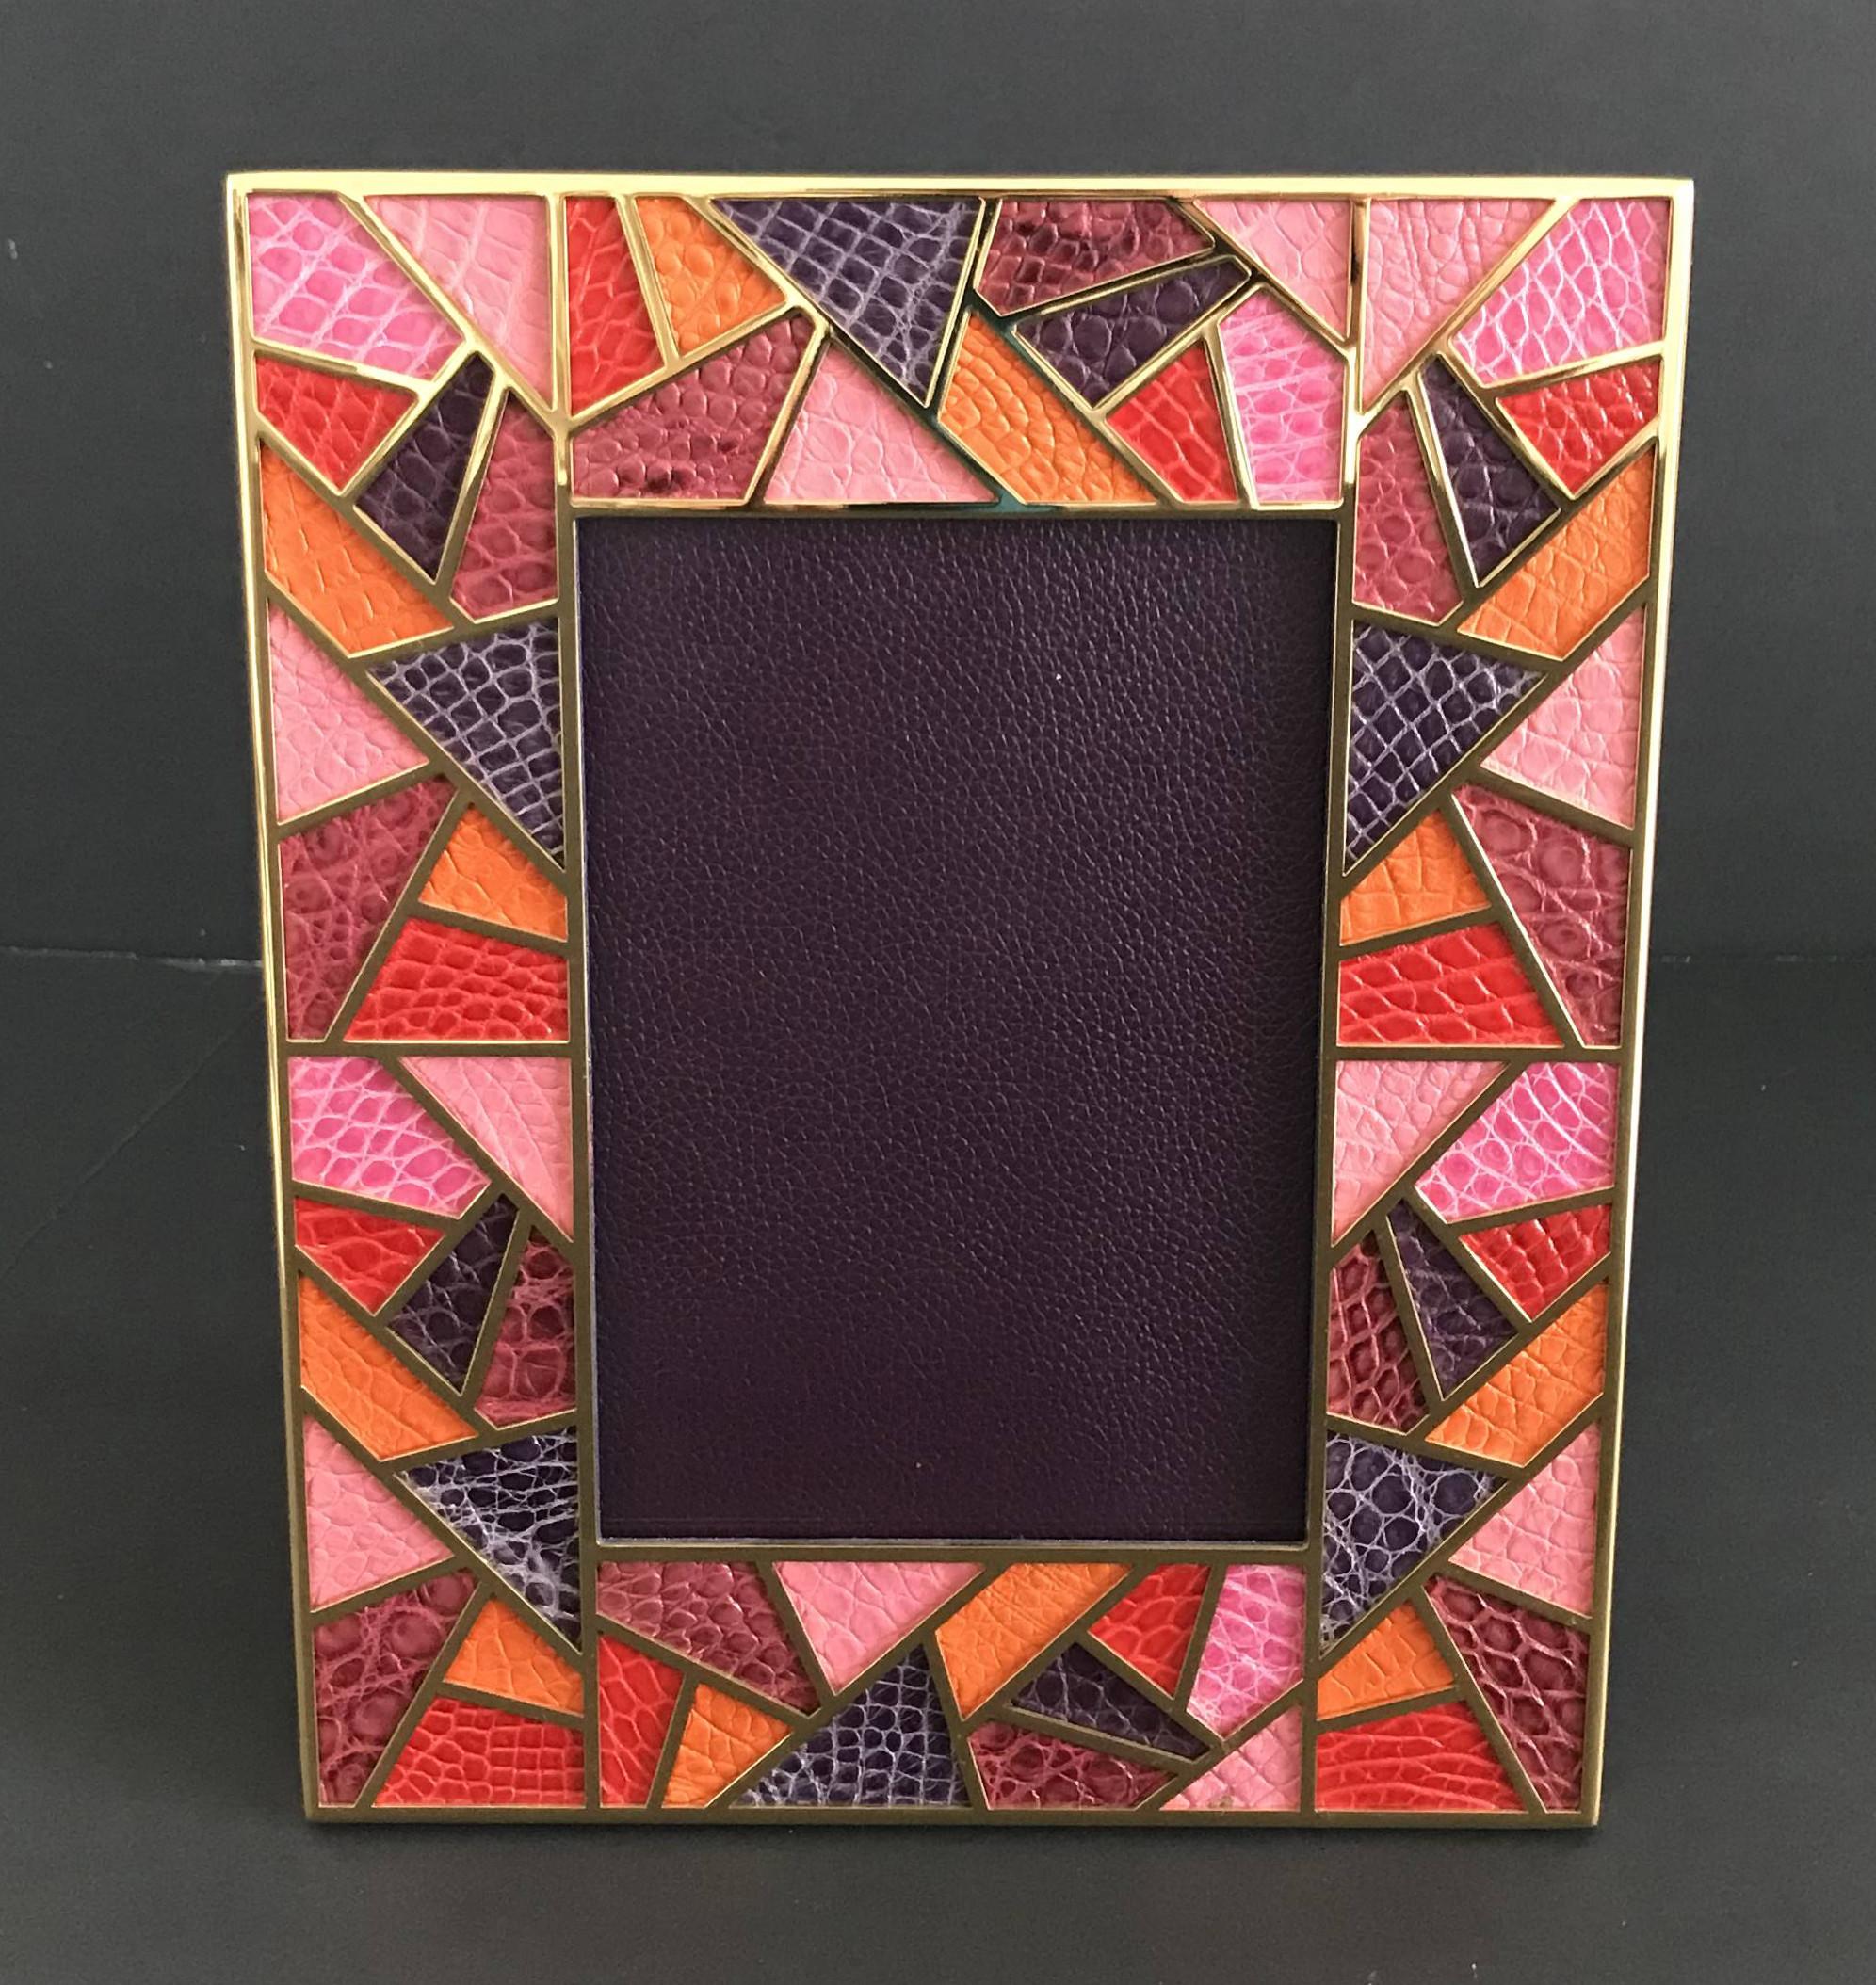 Multi-color crocodile leather and gold-plated picture frame by Fabio Ltd
Height: 10.5 inches / Width: 8.5 inches / Depth: 1 inch
Photo size: 5 inches by 7 inches
LAST 1 in stock in Los Angeles
Order Reference #: FABIOLTD PF31
This piece makes for